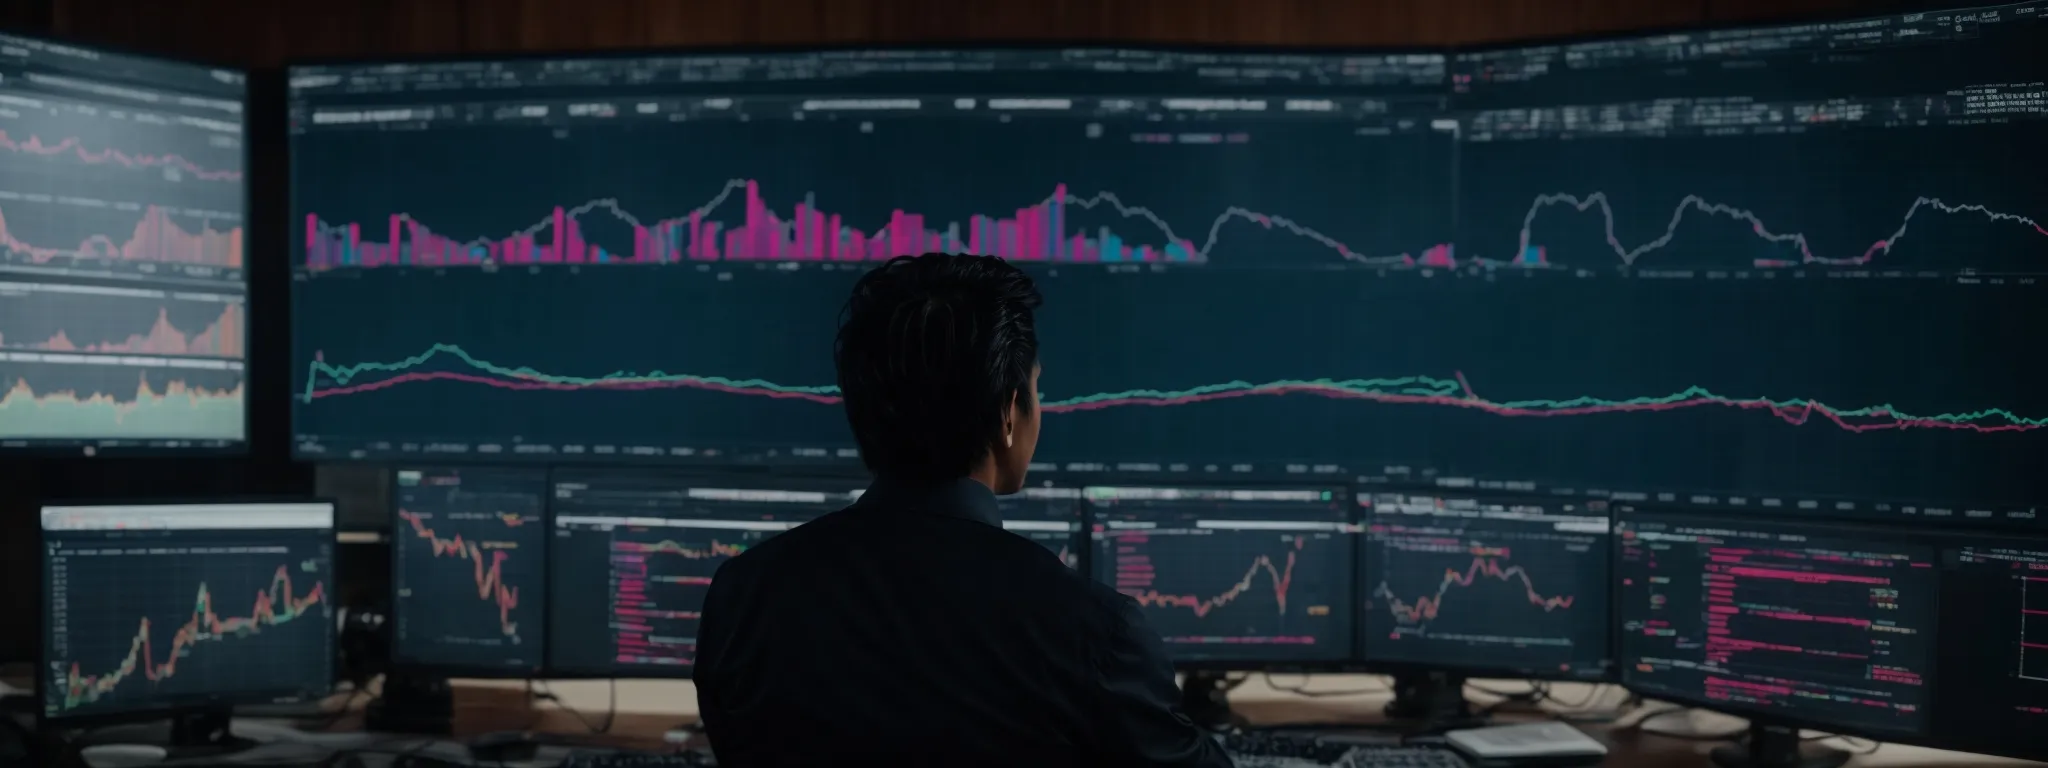 a person sits before a large monitor displaying colorful graphs and data analytics, reflecting the strategizing phase of keyword planning.